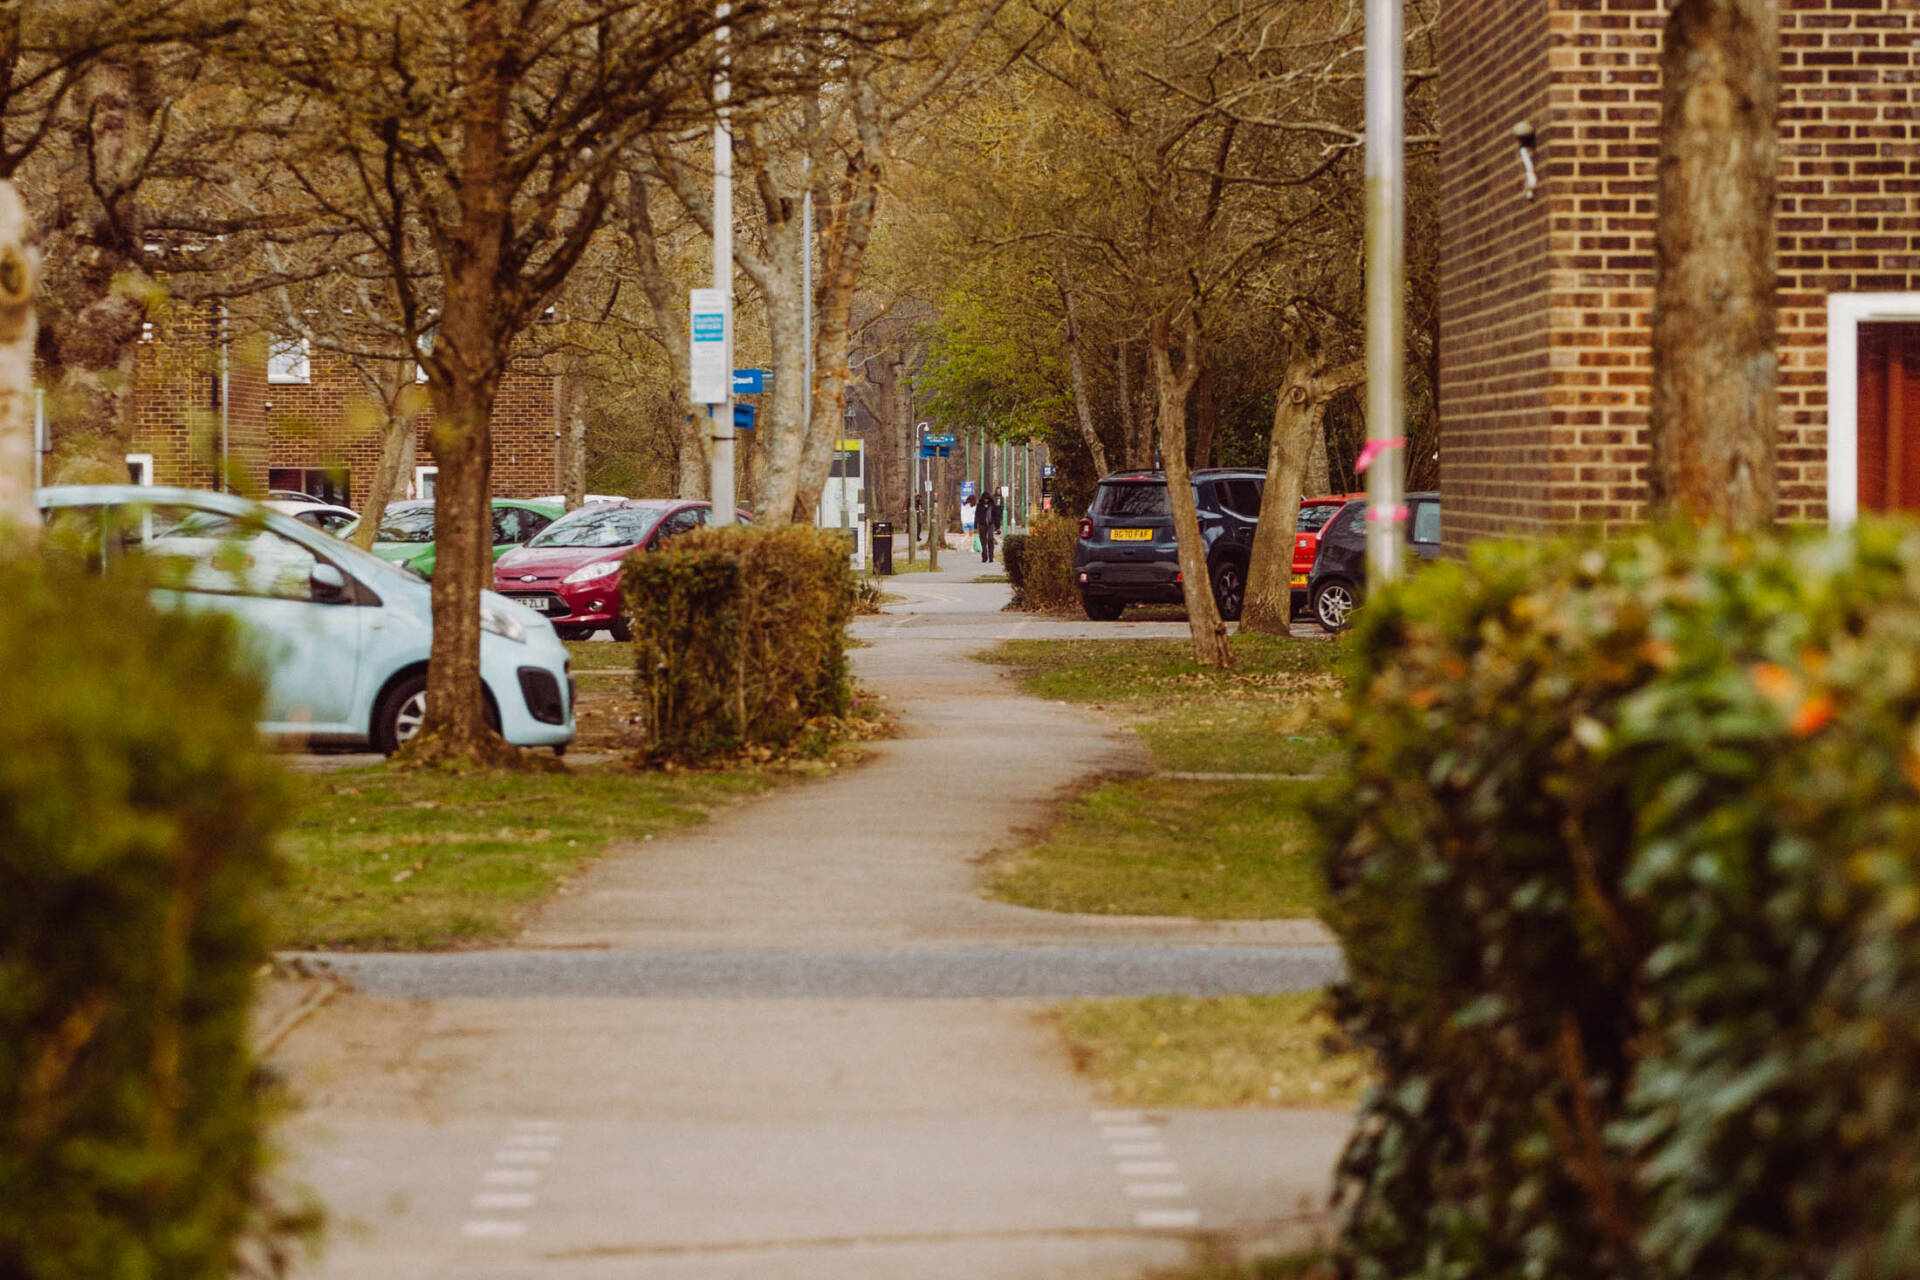 A path with cars parked on the left, and houses to the right.